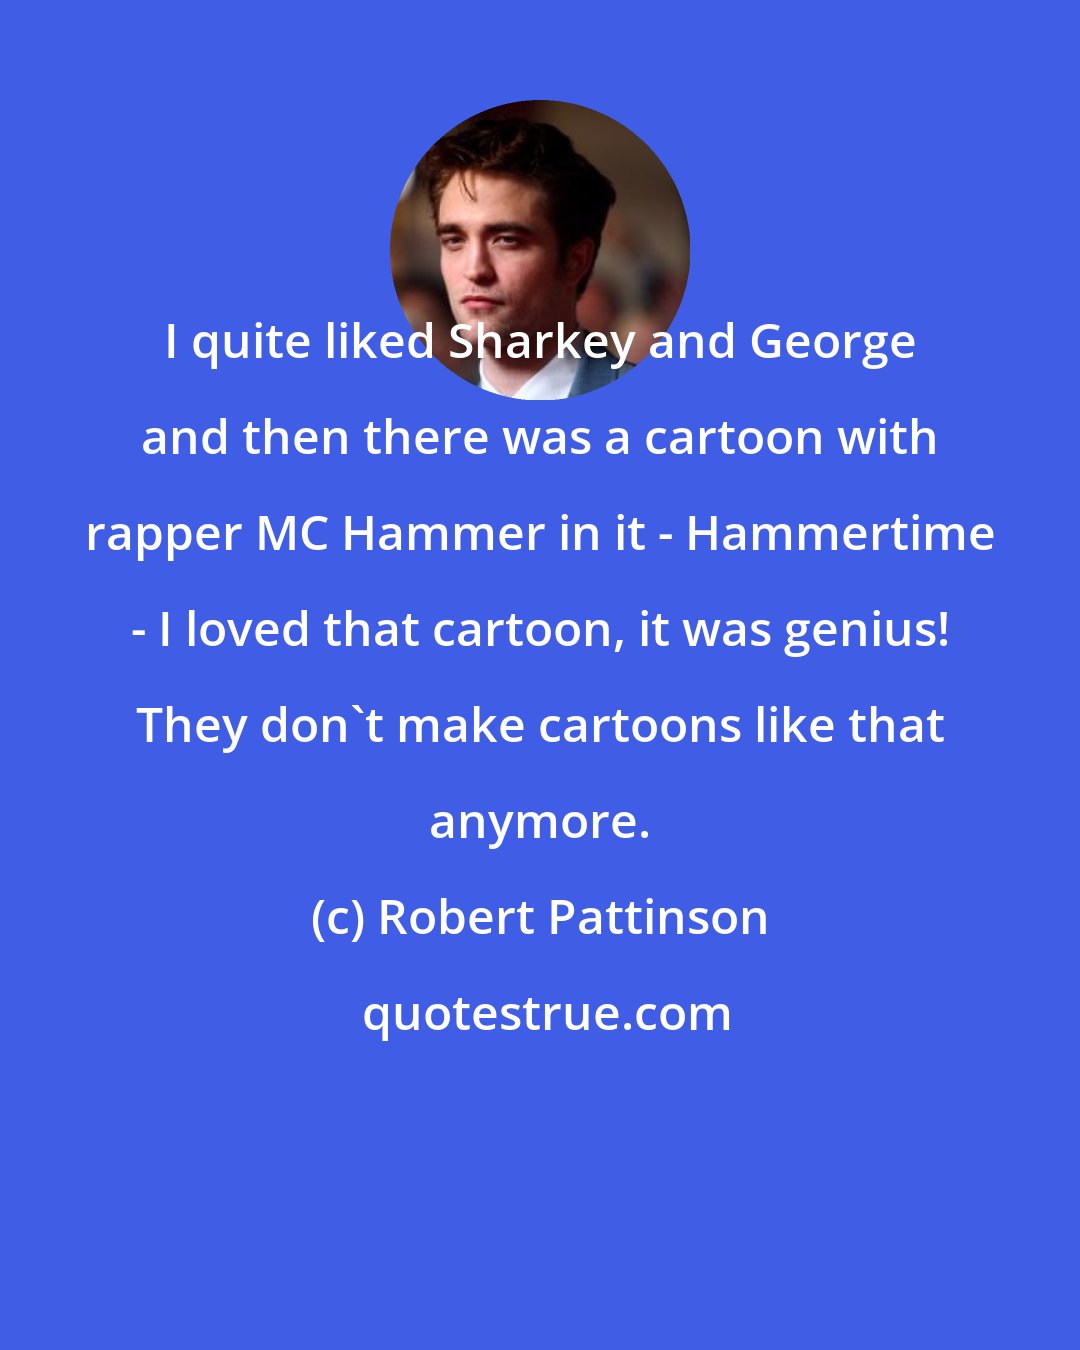 Robert Pattinson: I quite liked Sharkey and George and then there was a cartoon with rapper MC Hammer in it - Hammertime - I loved that cartoon, it was genius! They don't make cartoons like that anymore.